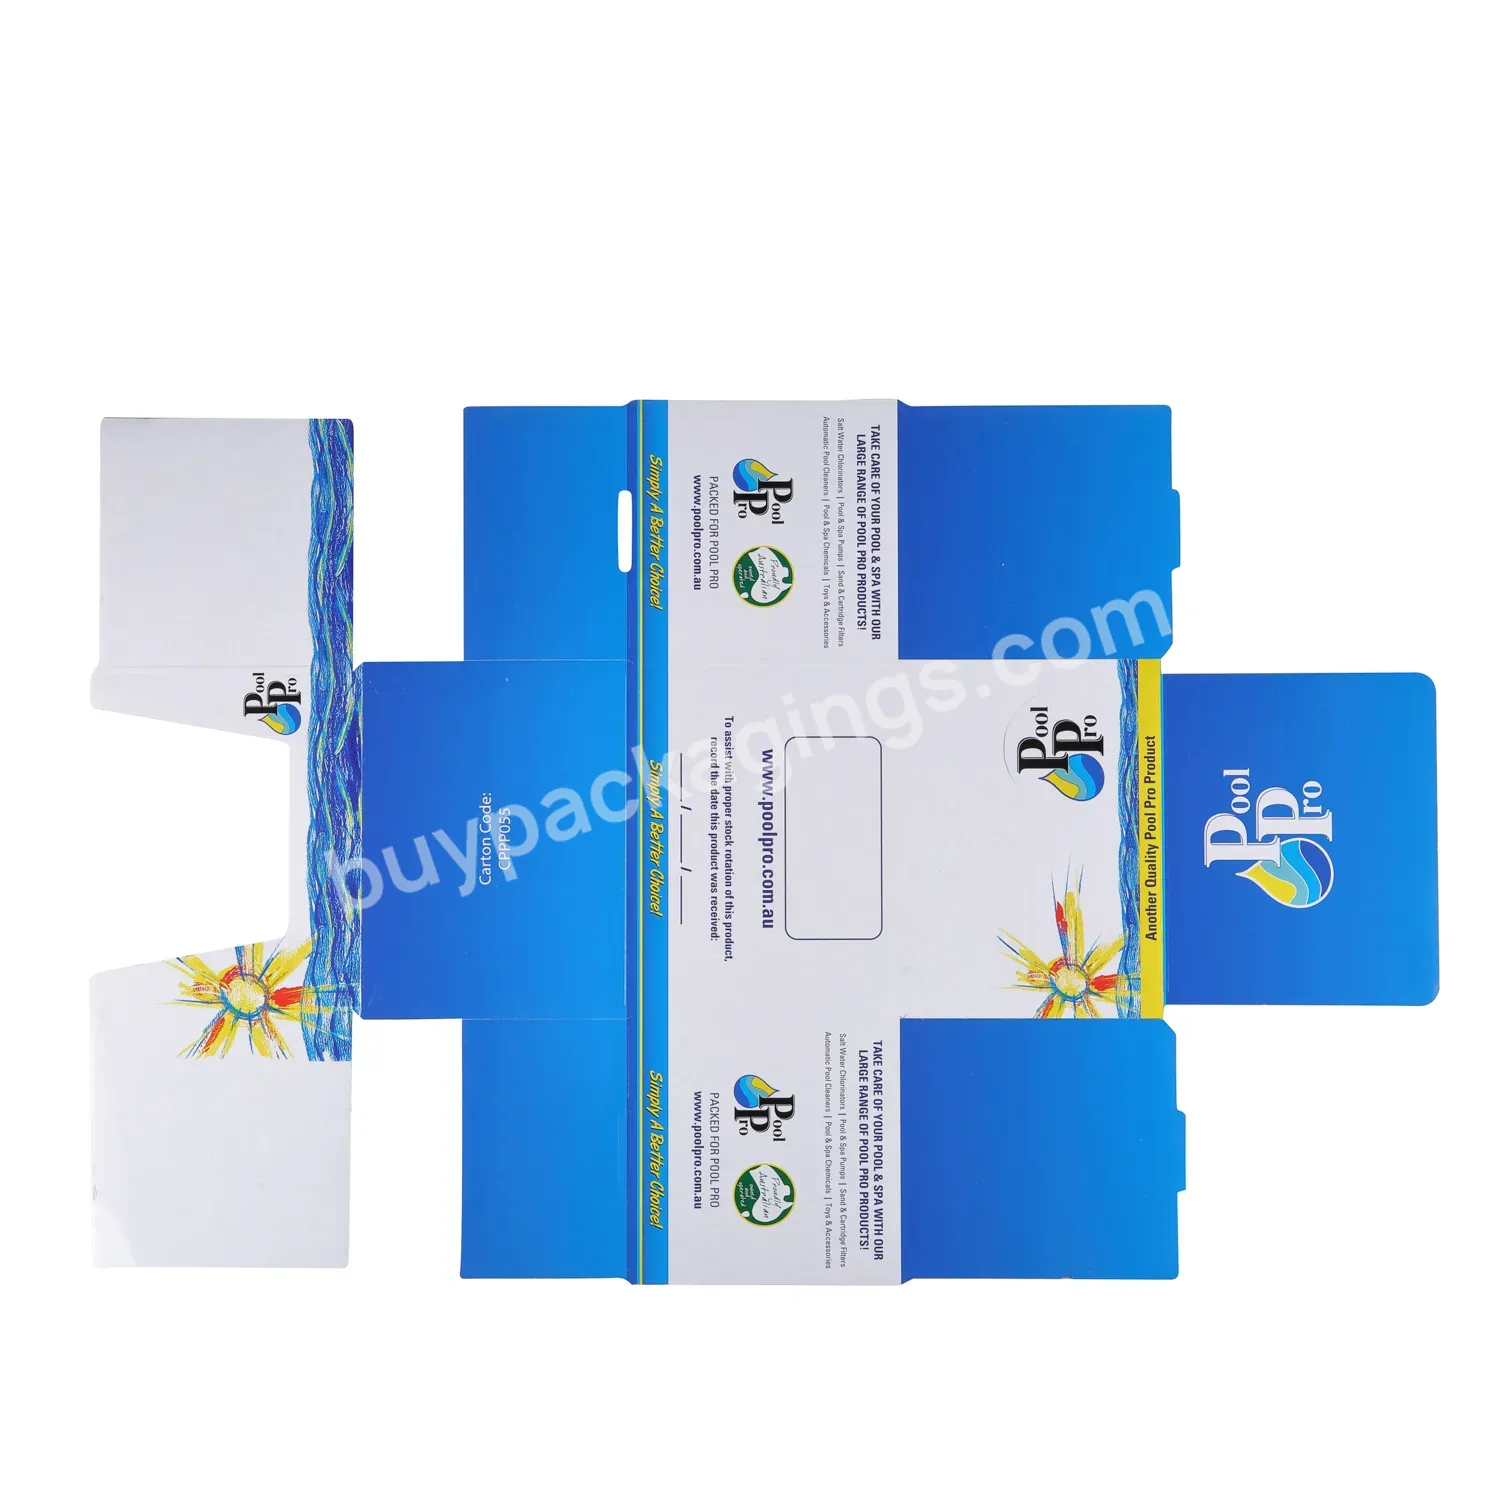 Cheap Wholesale Order Accepted Packing Used Custom Printed Banana Fruit Box - Buy Paper Box,Fruit Box,Custom Paper Box.